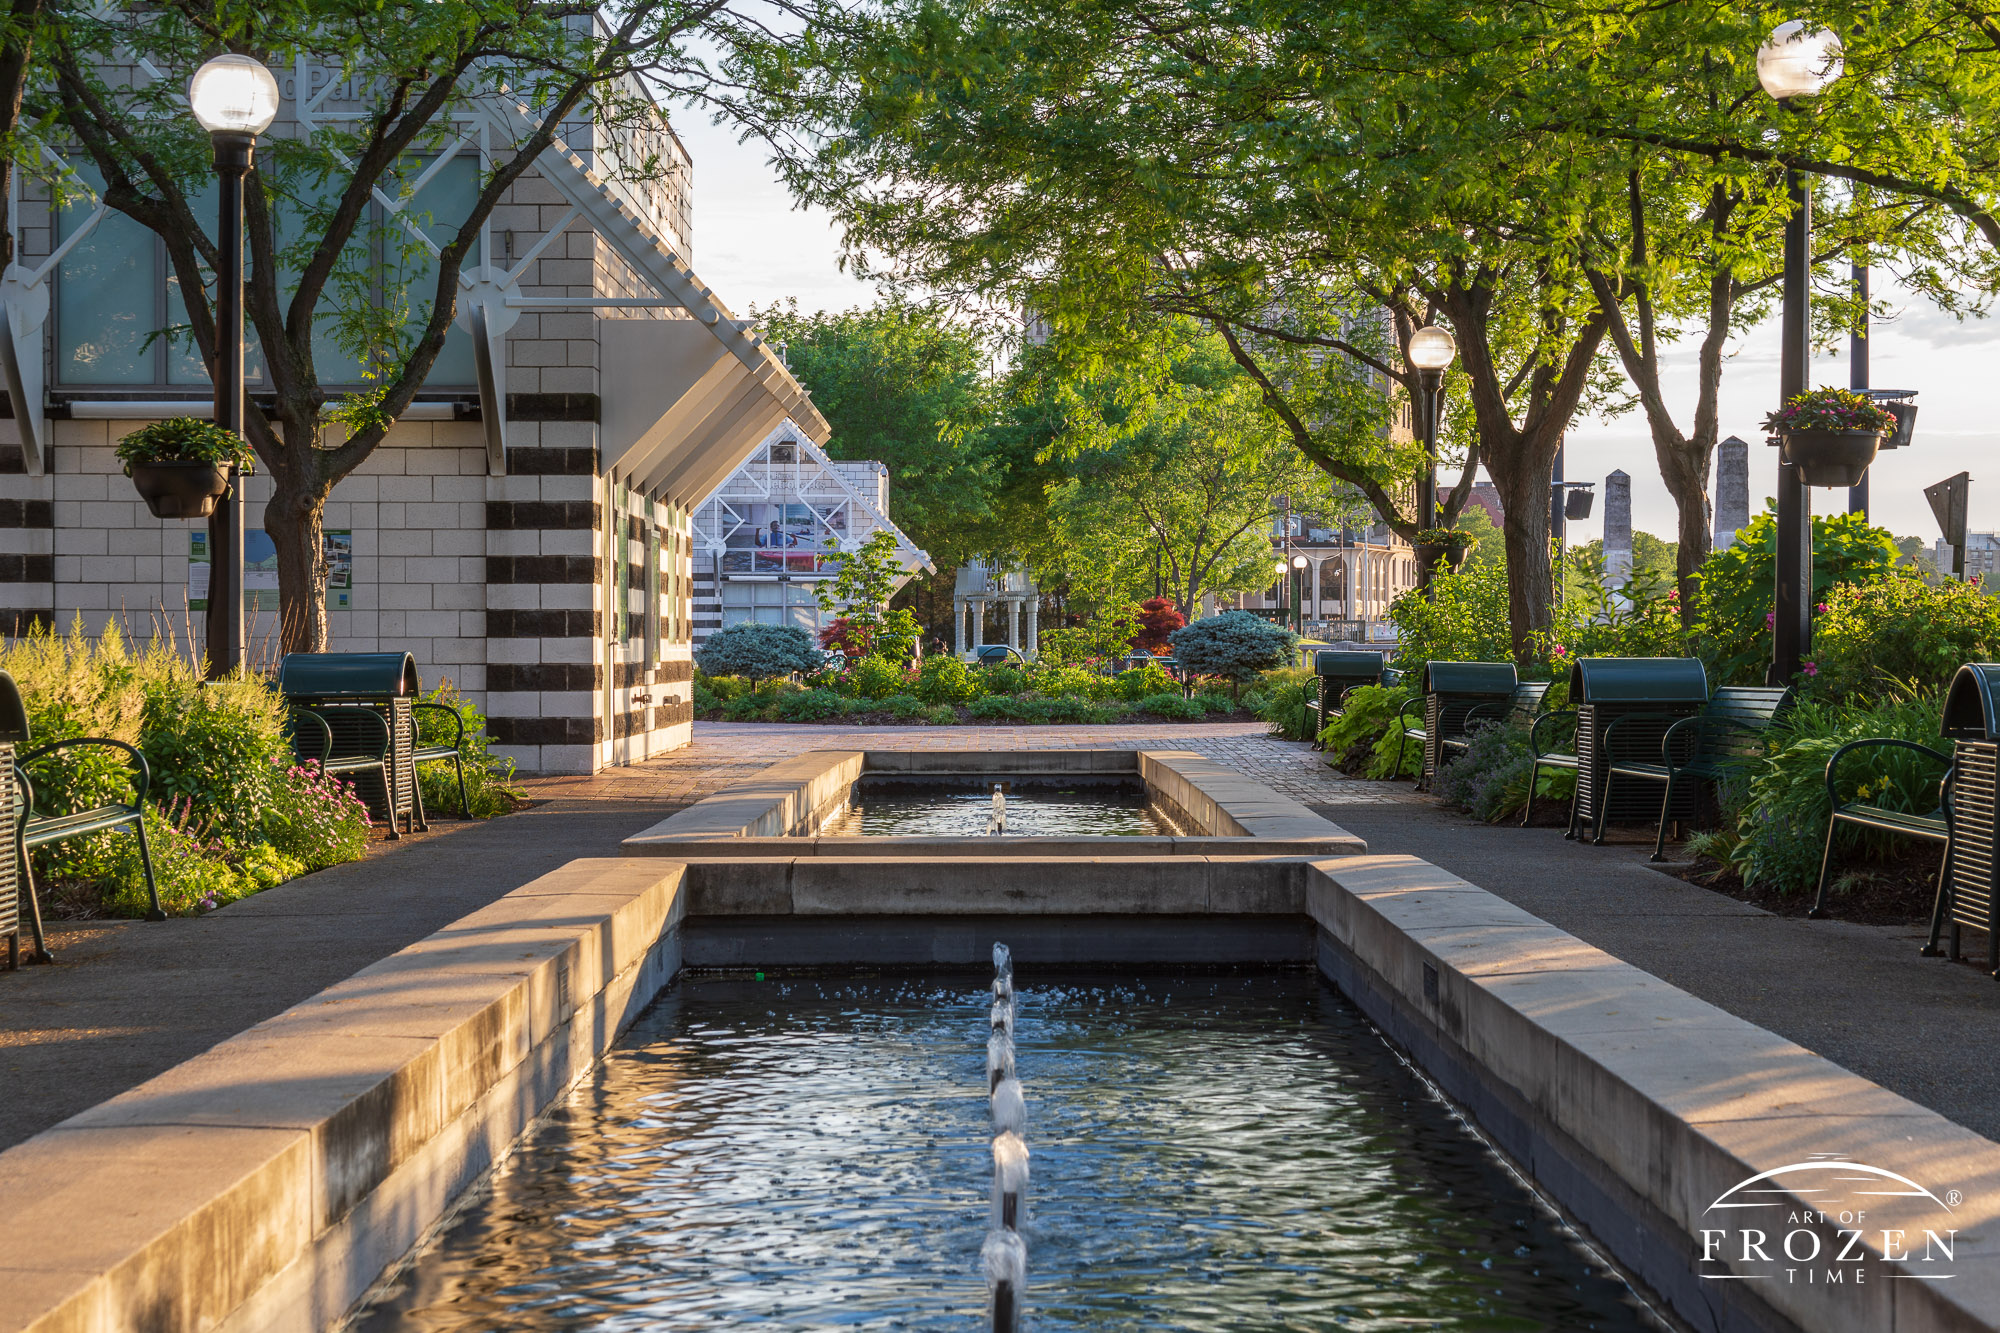 A cityscape scene from Dayton’s RiverScape MetroPark which long fountains offer trickle sounds as the setting sun washes the plaza in golden light.